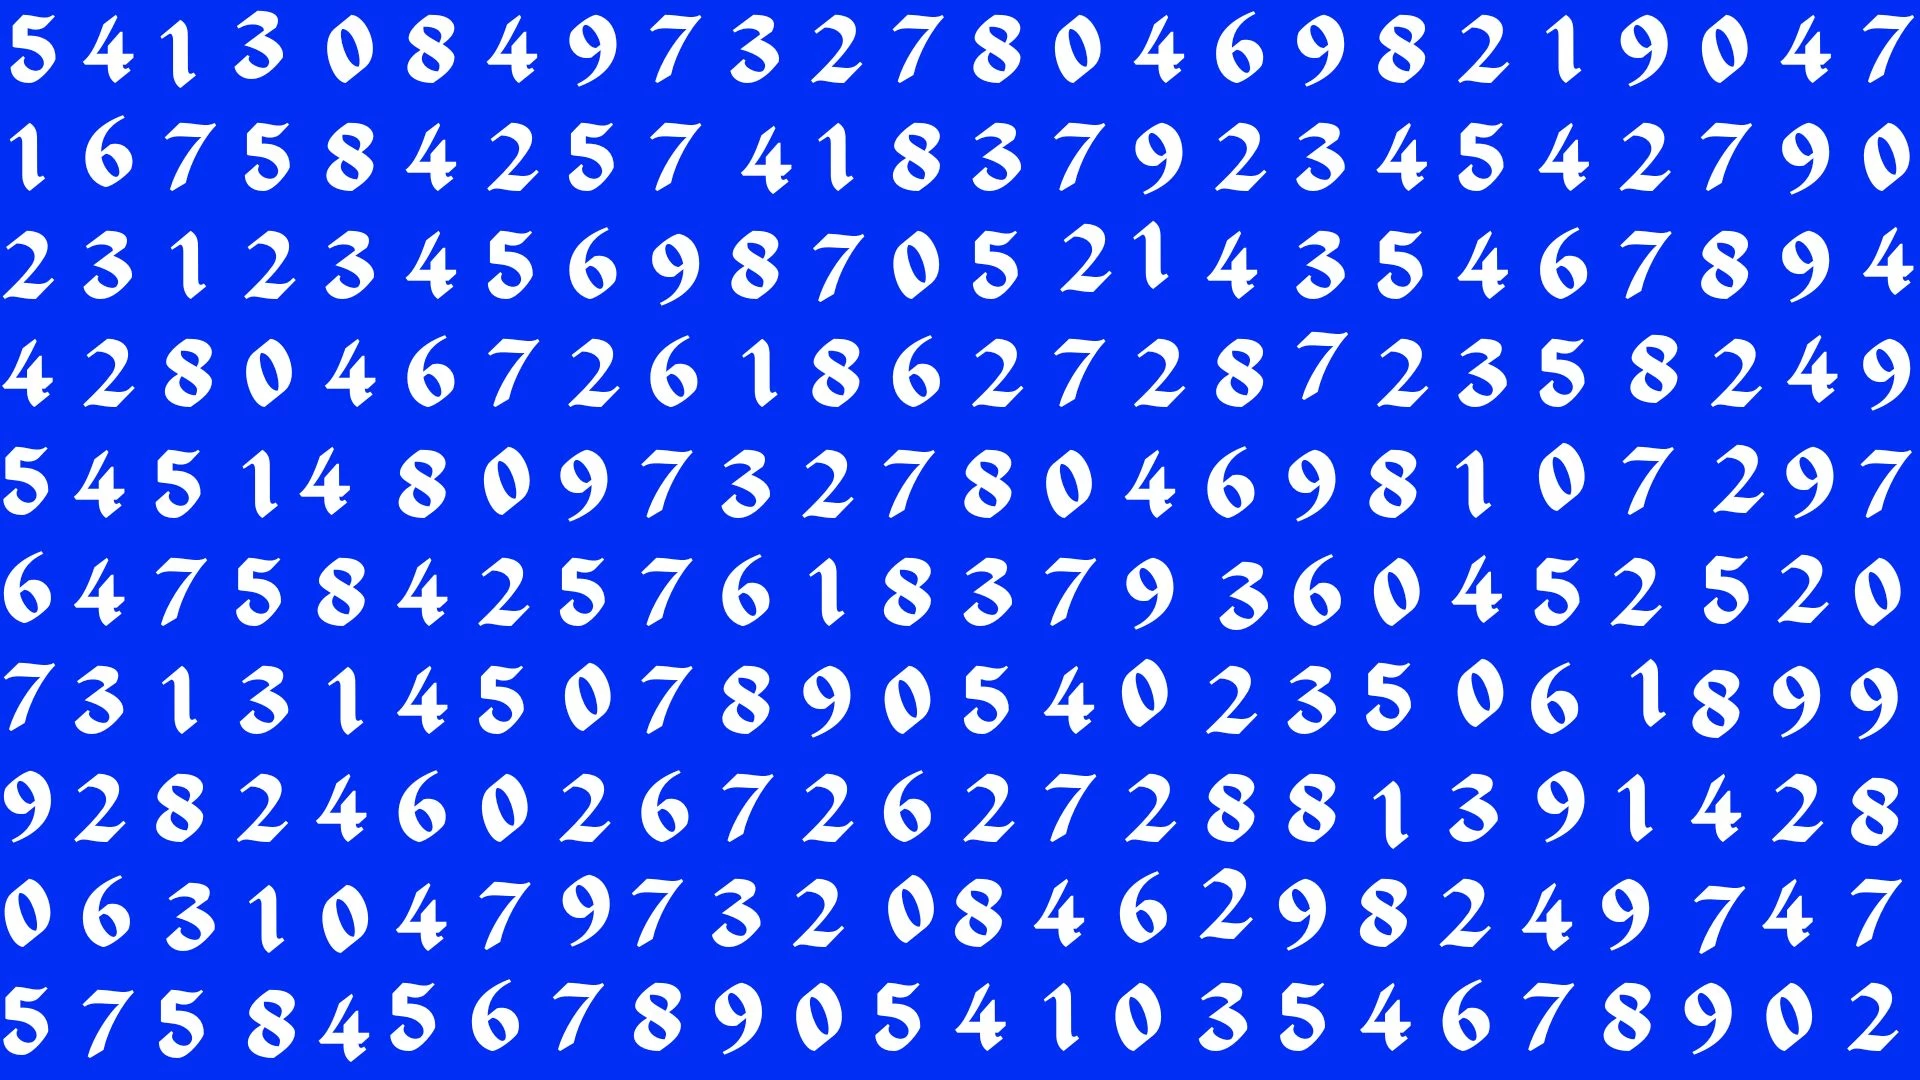 Are you smart enough to Find the Number 6968 in 12 Secs